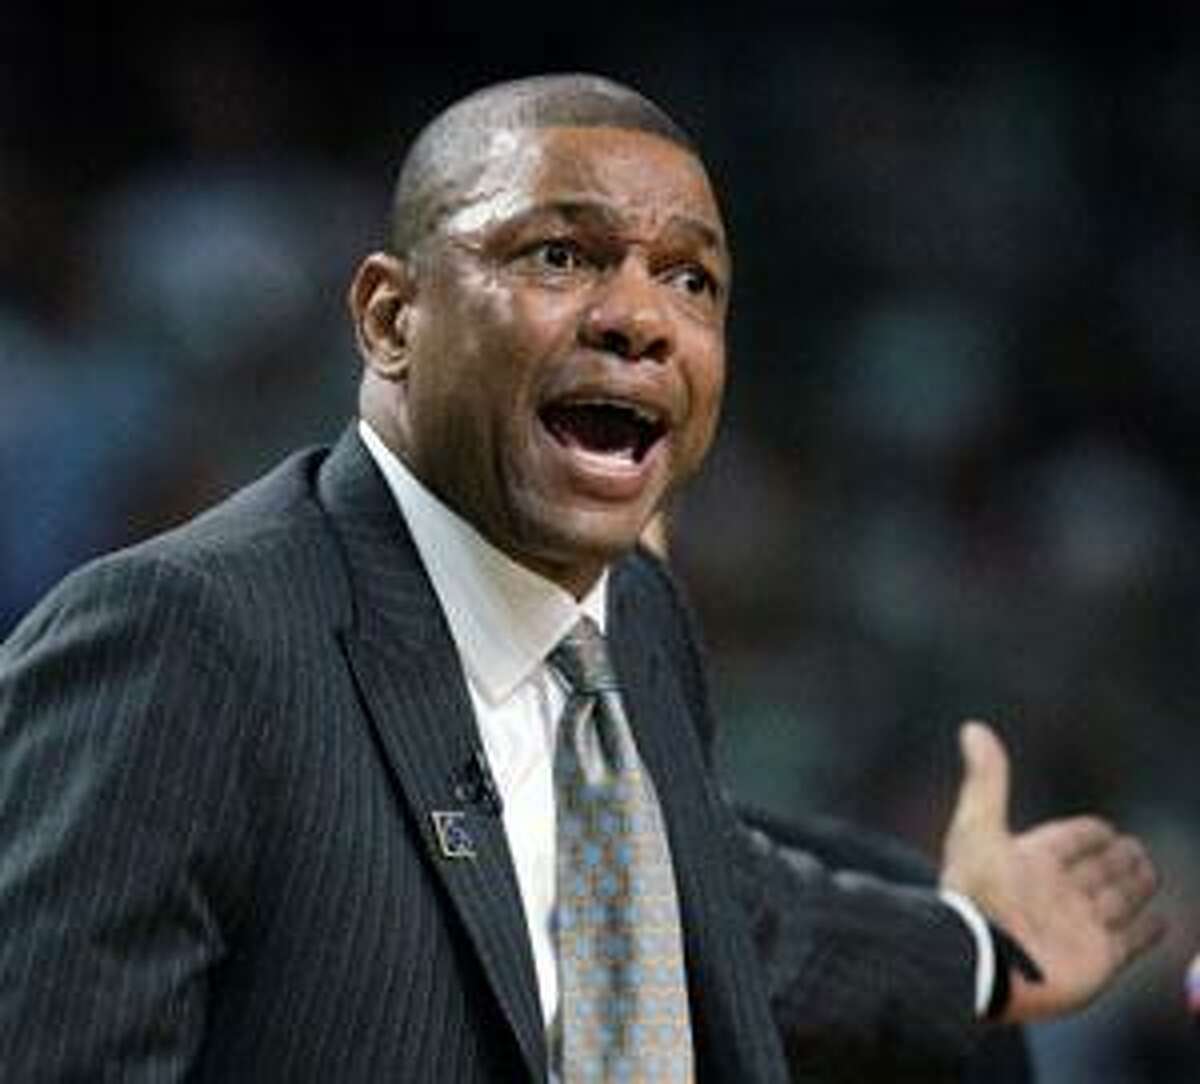 Boston Celtics head coach Doc Rivers argues a call during the fourth quarter of Game 7 of a first-round NBA playoff series against the Chicago Bulls in Boston, Saturday. The Celtics won 109-99.